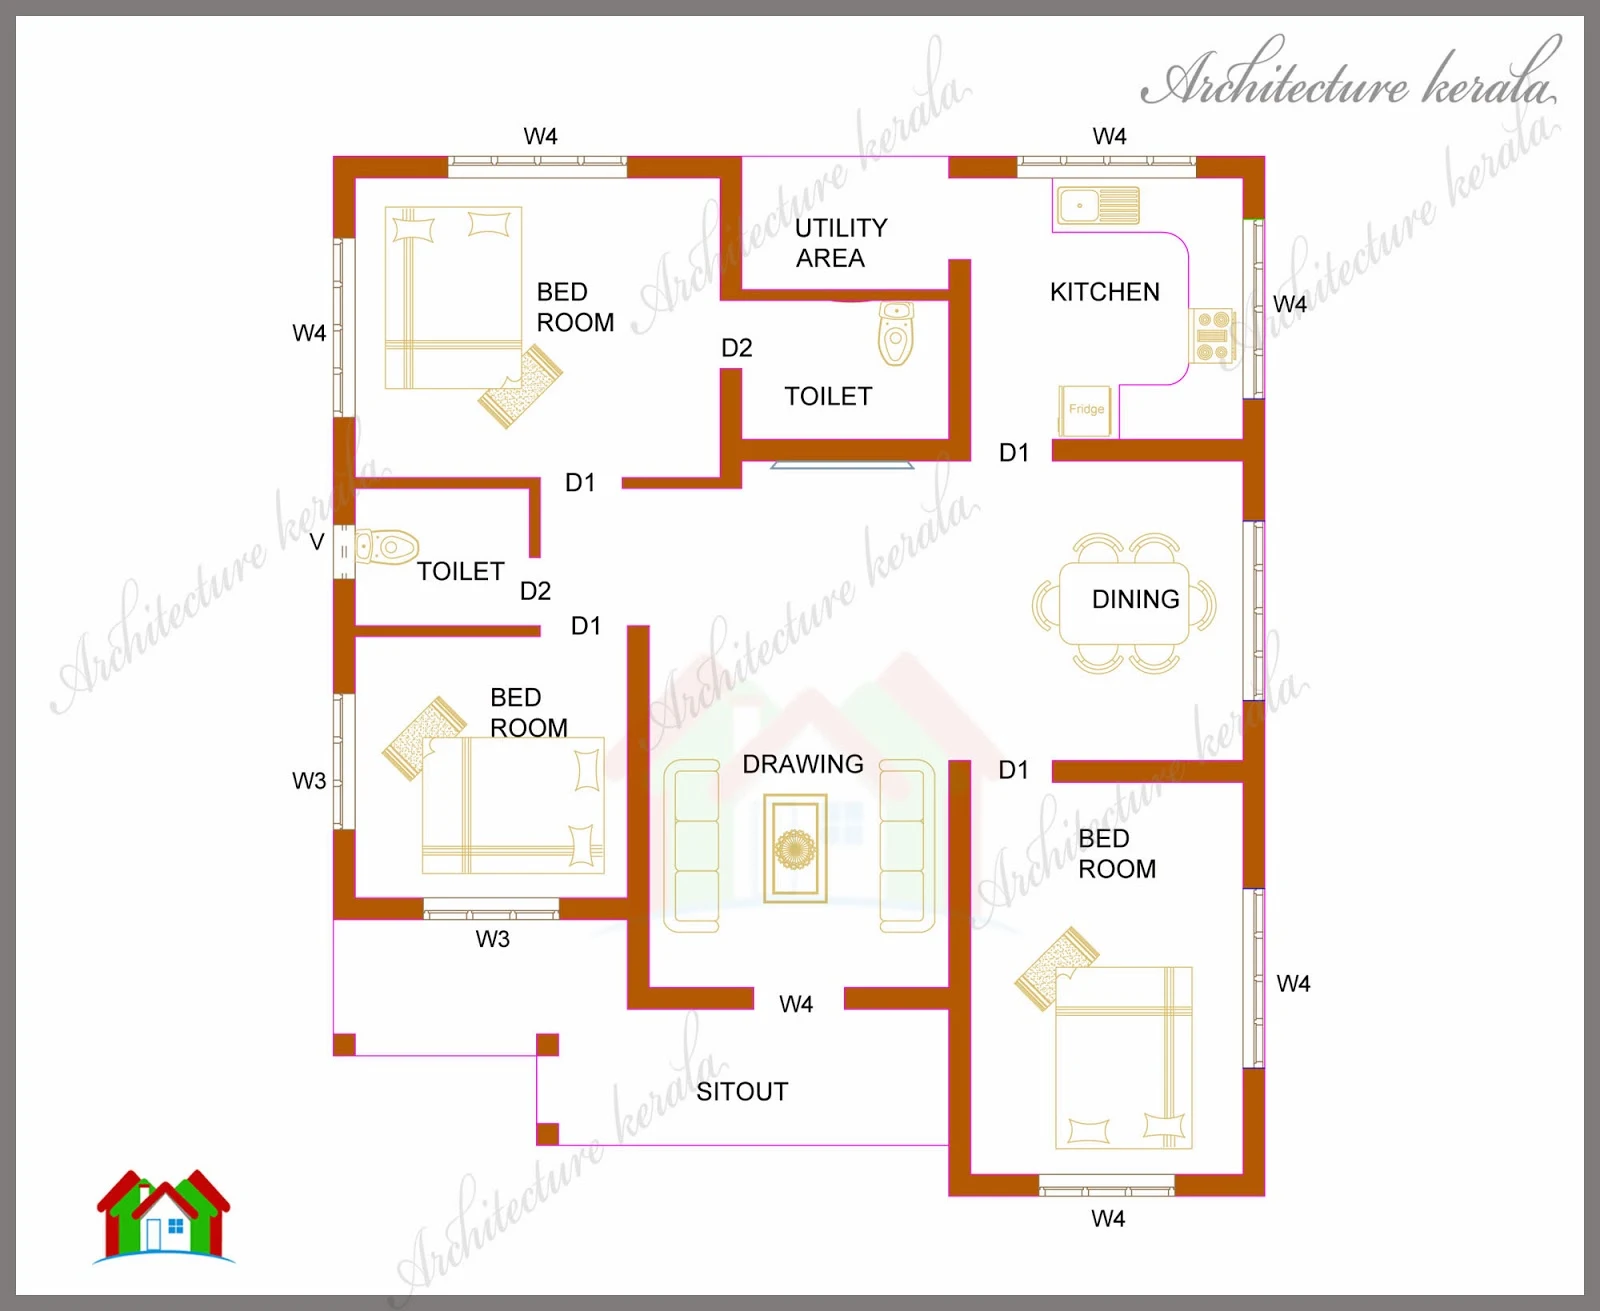 THREE BEDROOMS IN 1200 SQUARE FEET KERALA HOUSE PLAN